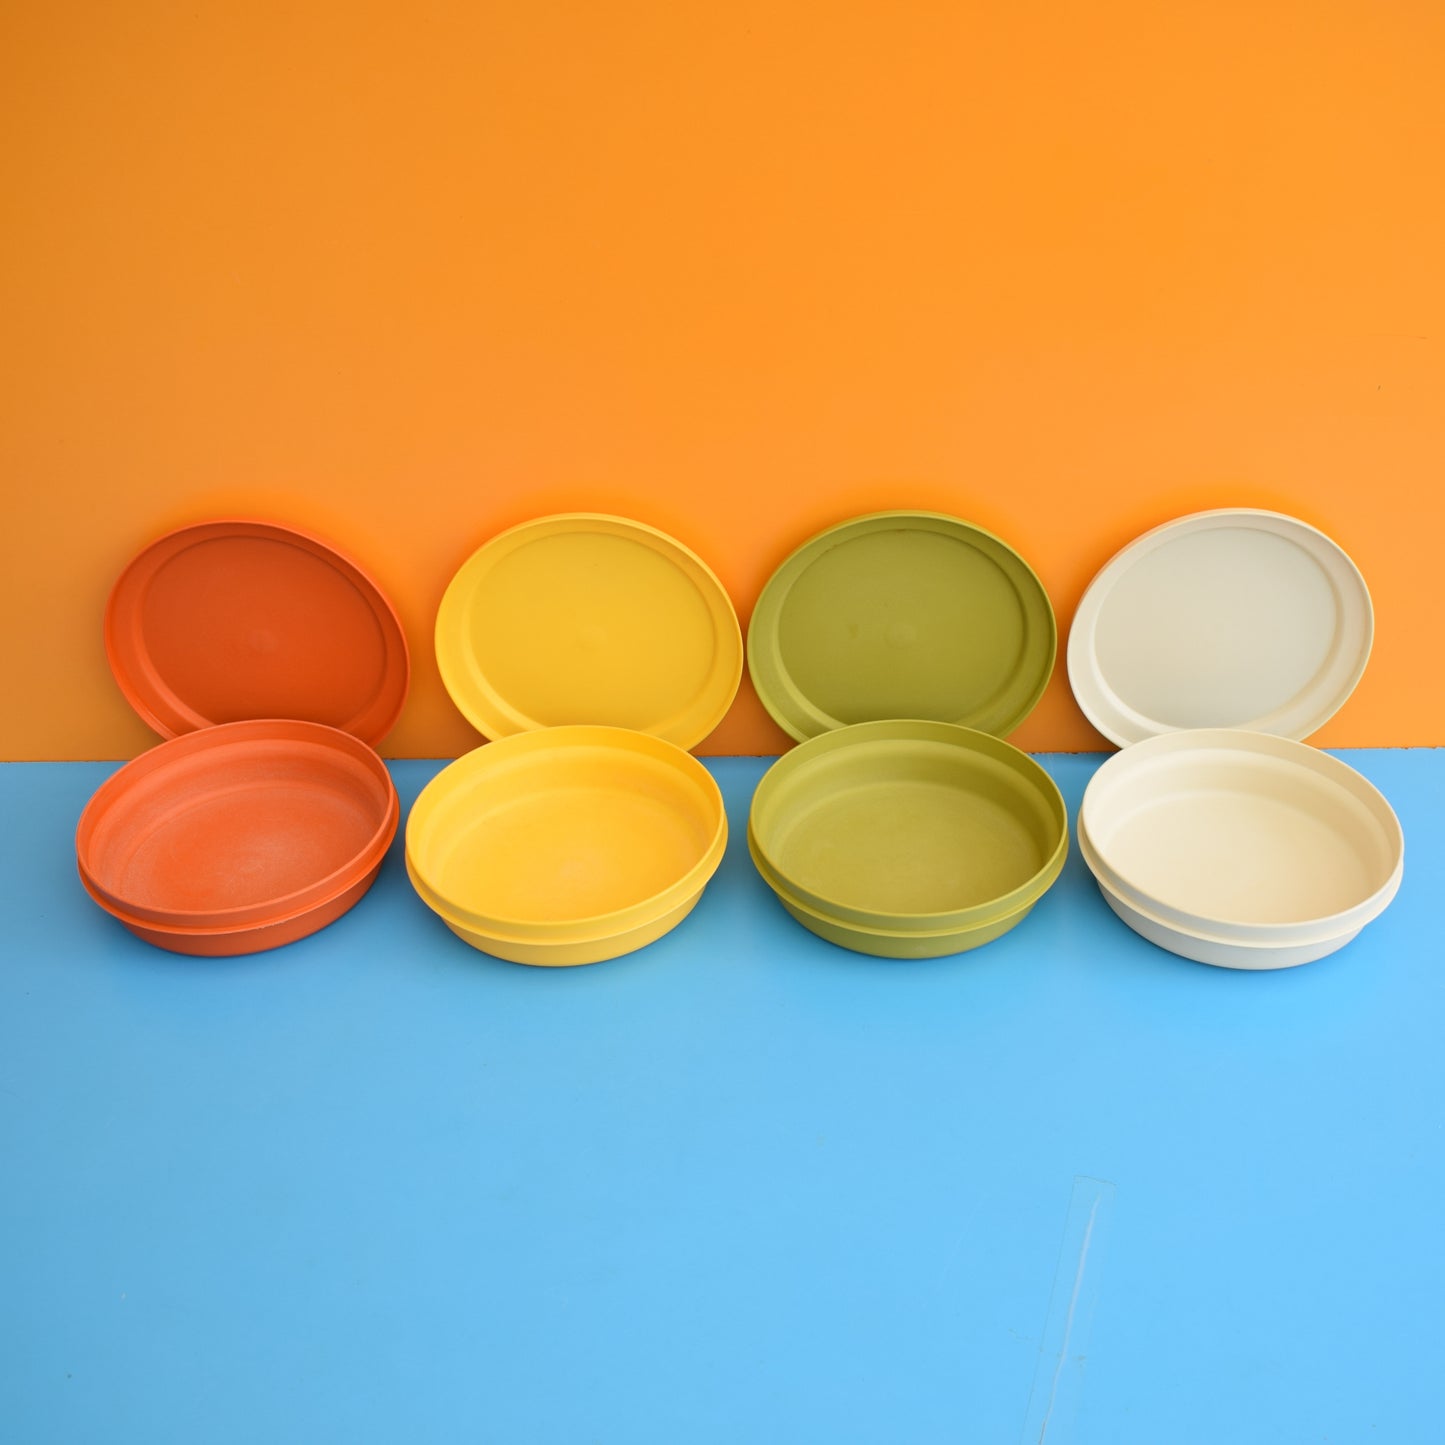 Vintage 1970s Tupperware Bowls/ Plates / Containers